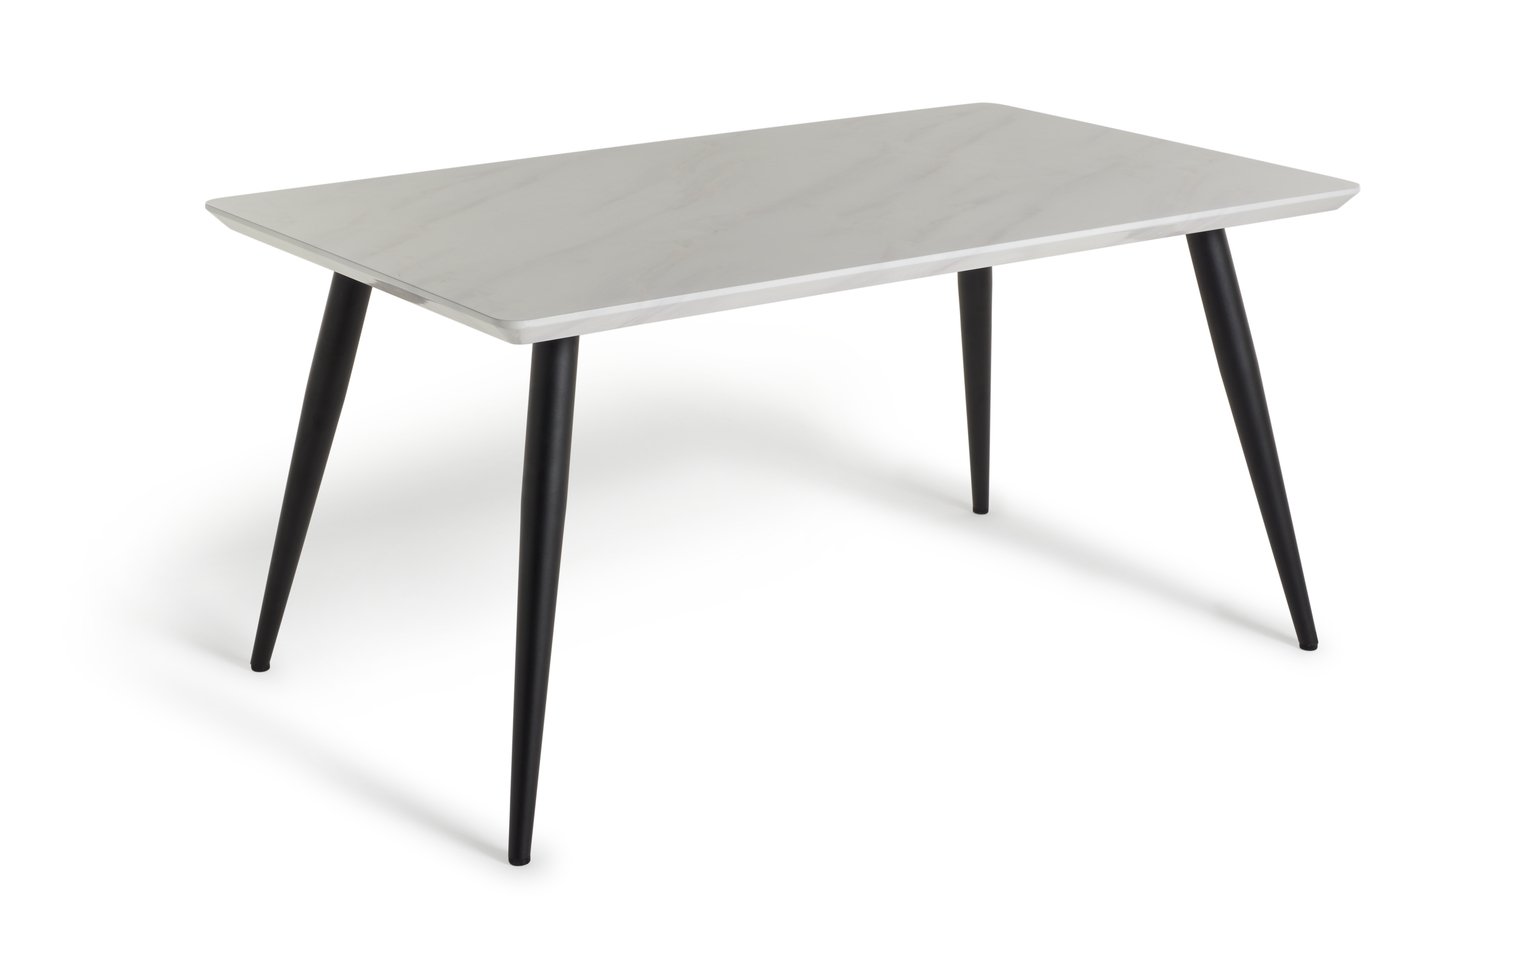 Argos Home Sienna Marble Effect 6 Seater Dining Table - Grey